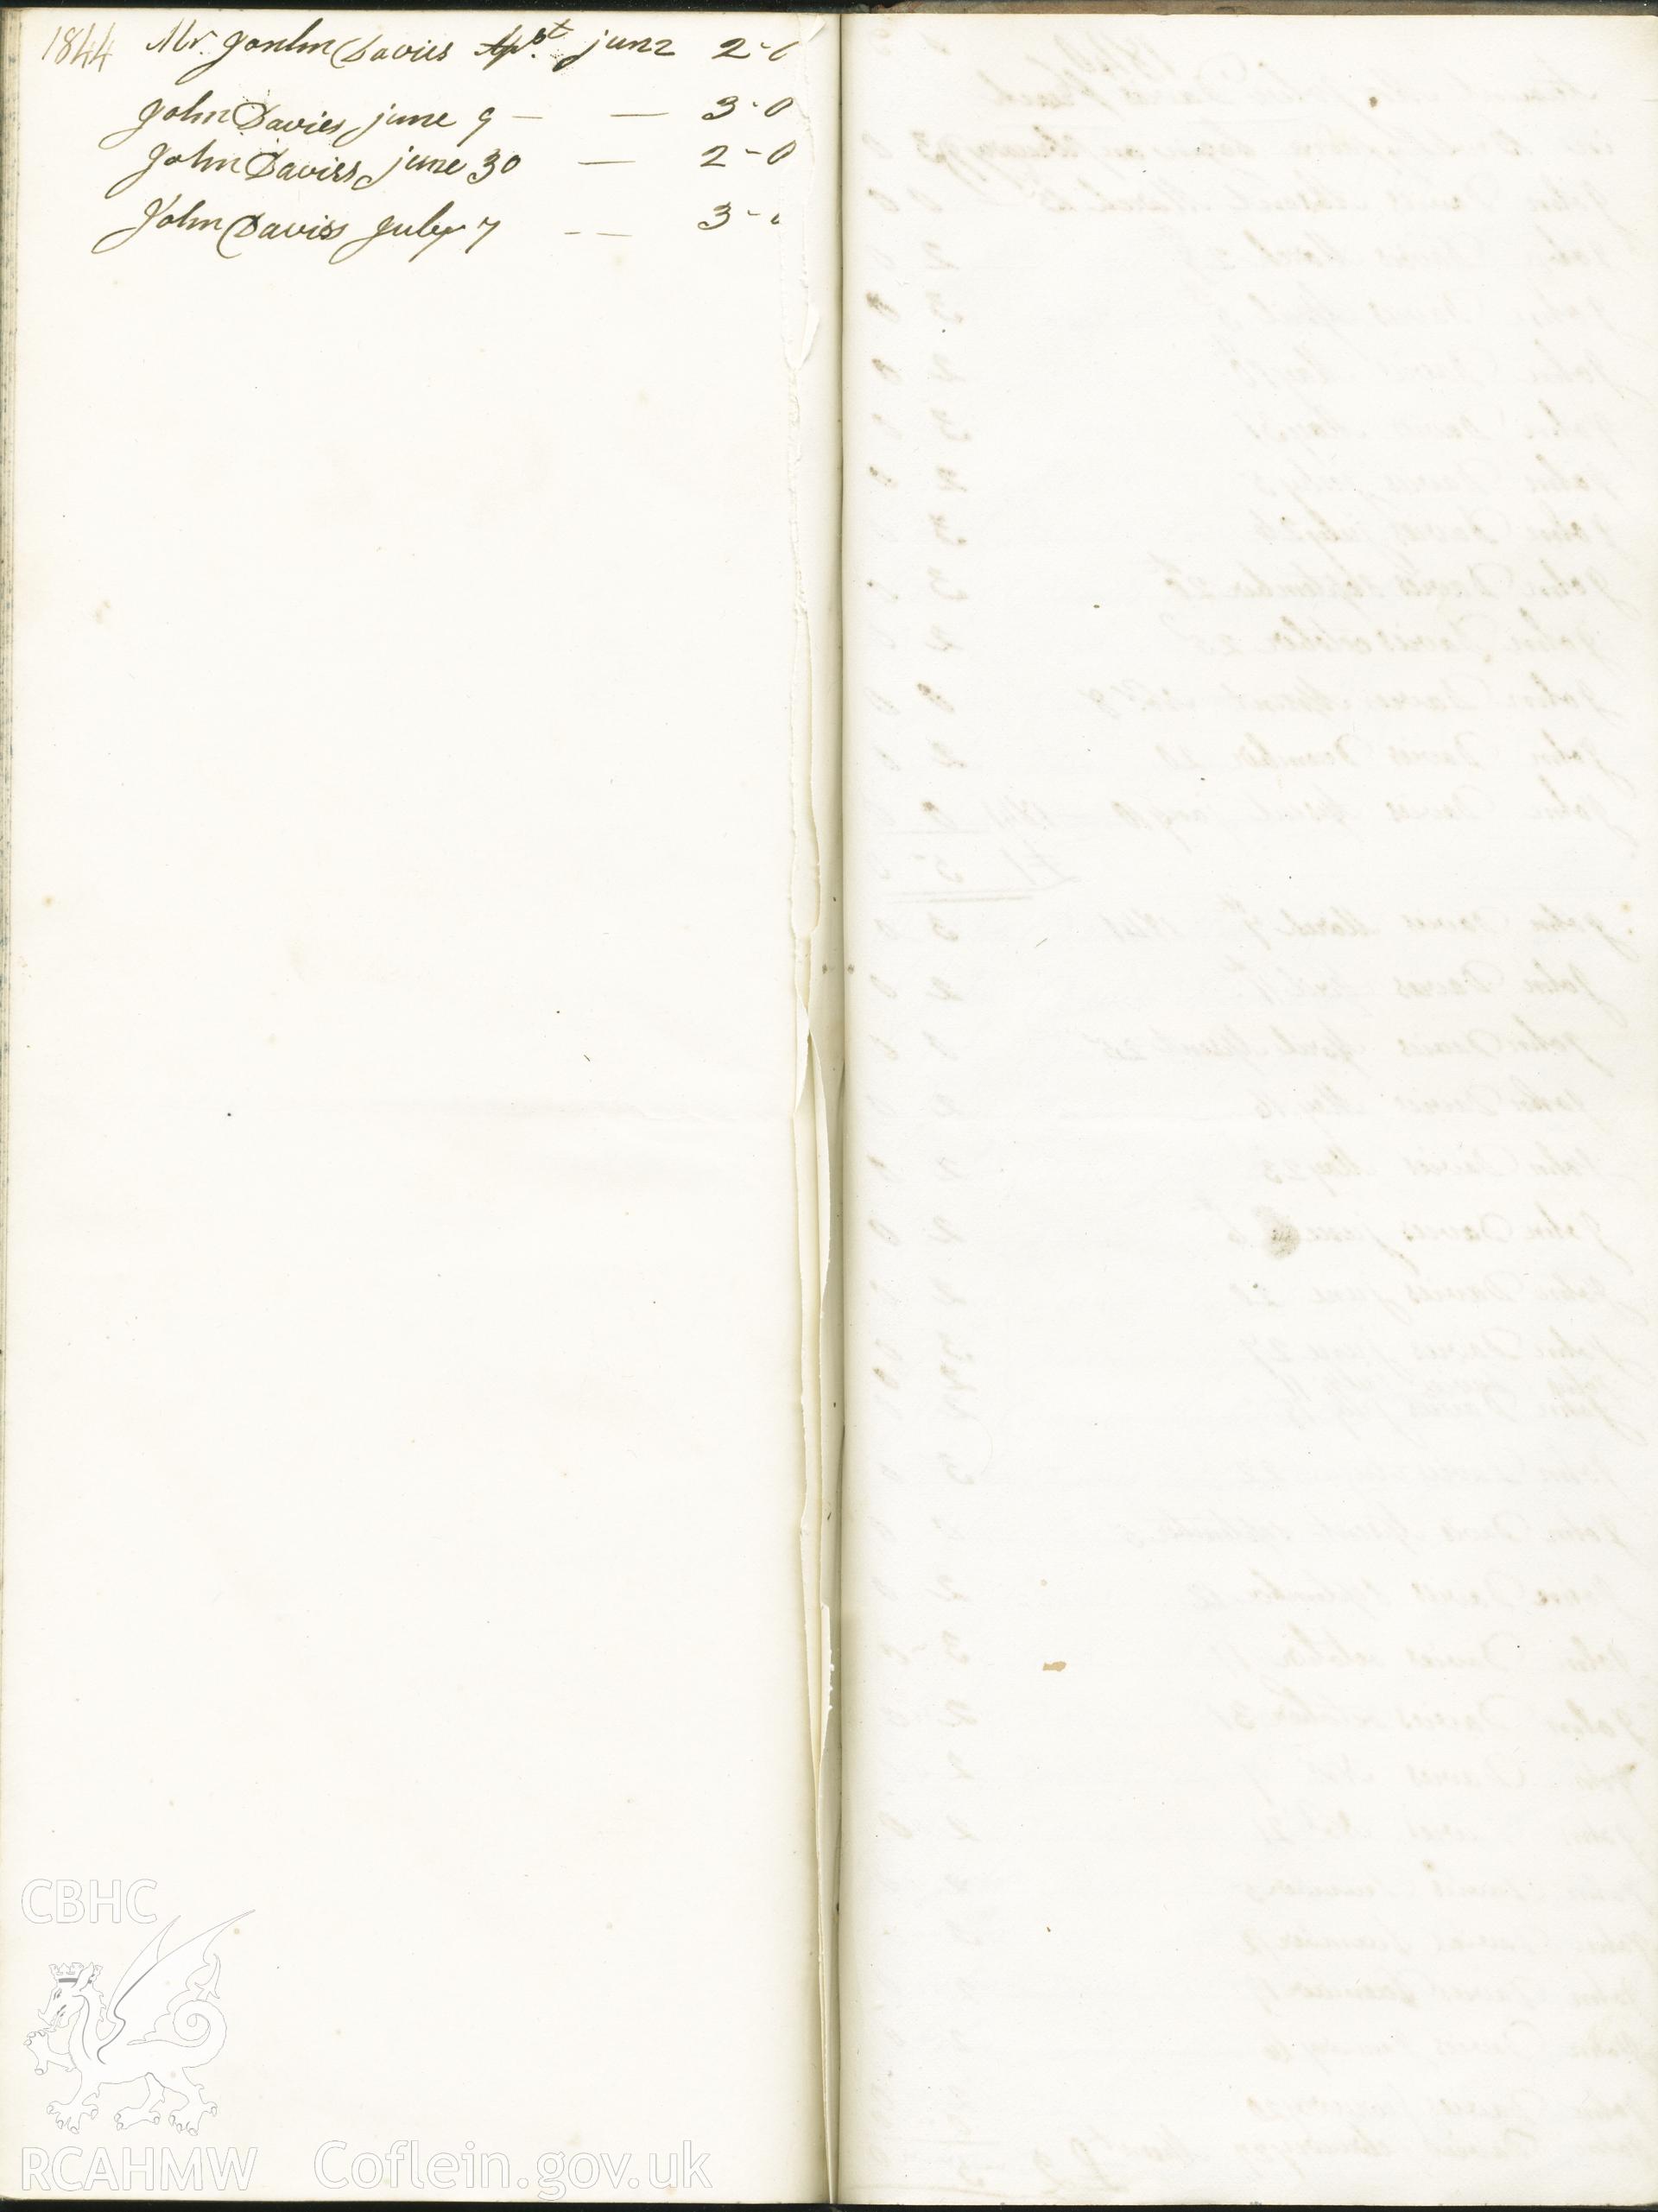 Handwritten subscribers book at Hen Gapel, Rhydowen. From 1844 Mr gordon Davies 1st june 2s 6d to John Davies July 7th 3s. Donated to RCAHMW as part of the Digital Dissent Project.